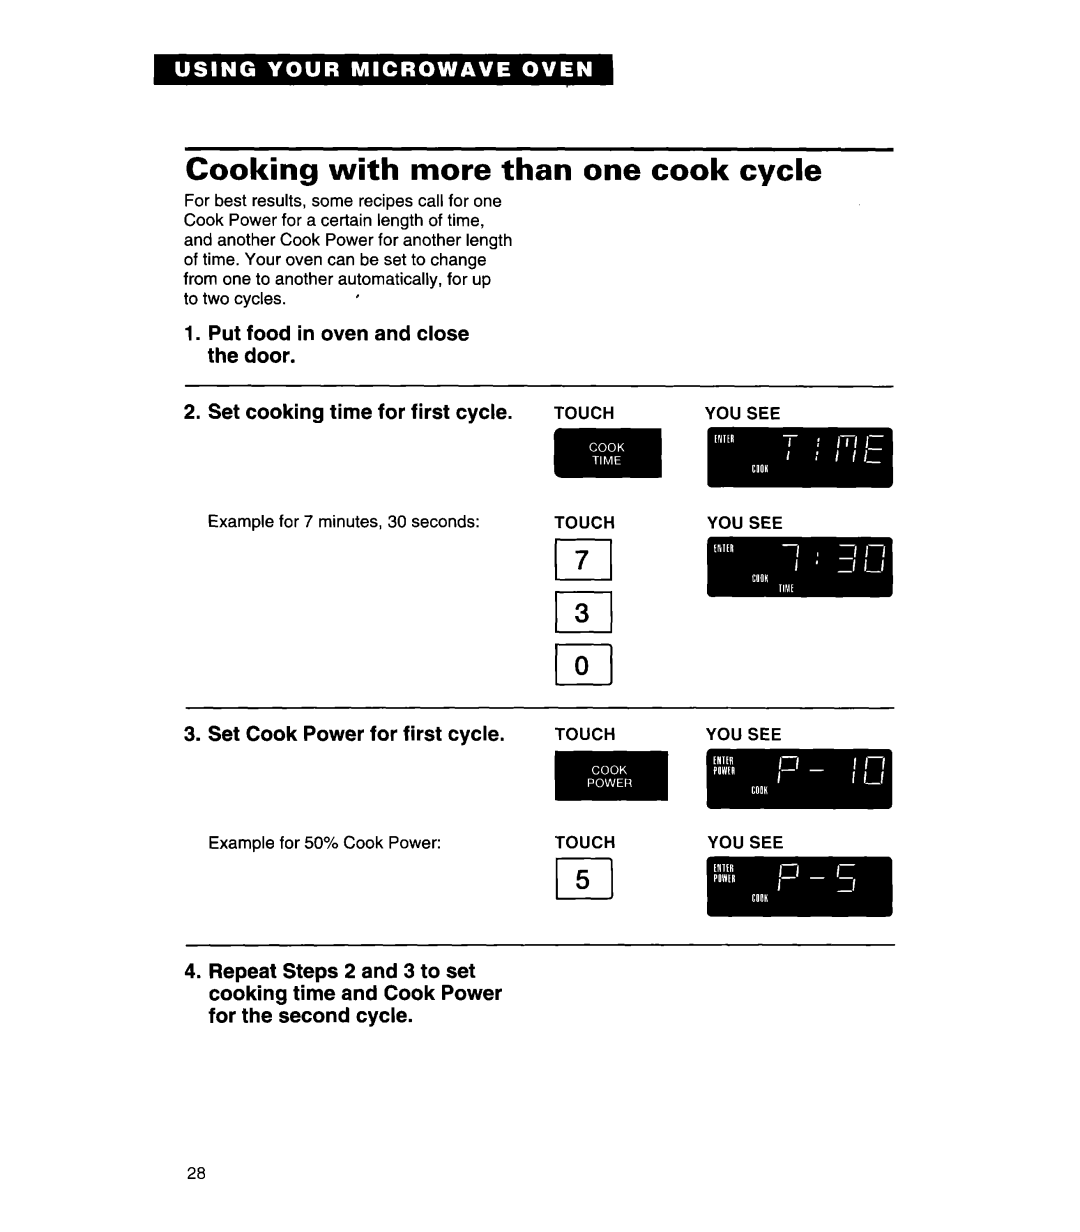 Whirlpool MH7130XE warranty Cooking with more than one cook cycle, Set Cook Power for first cycle 